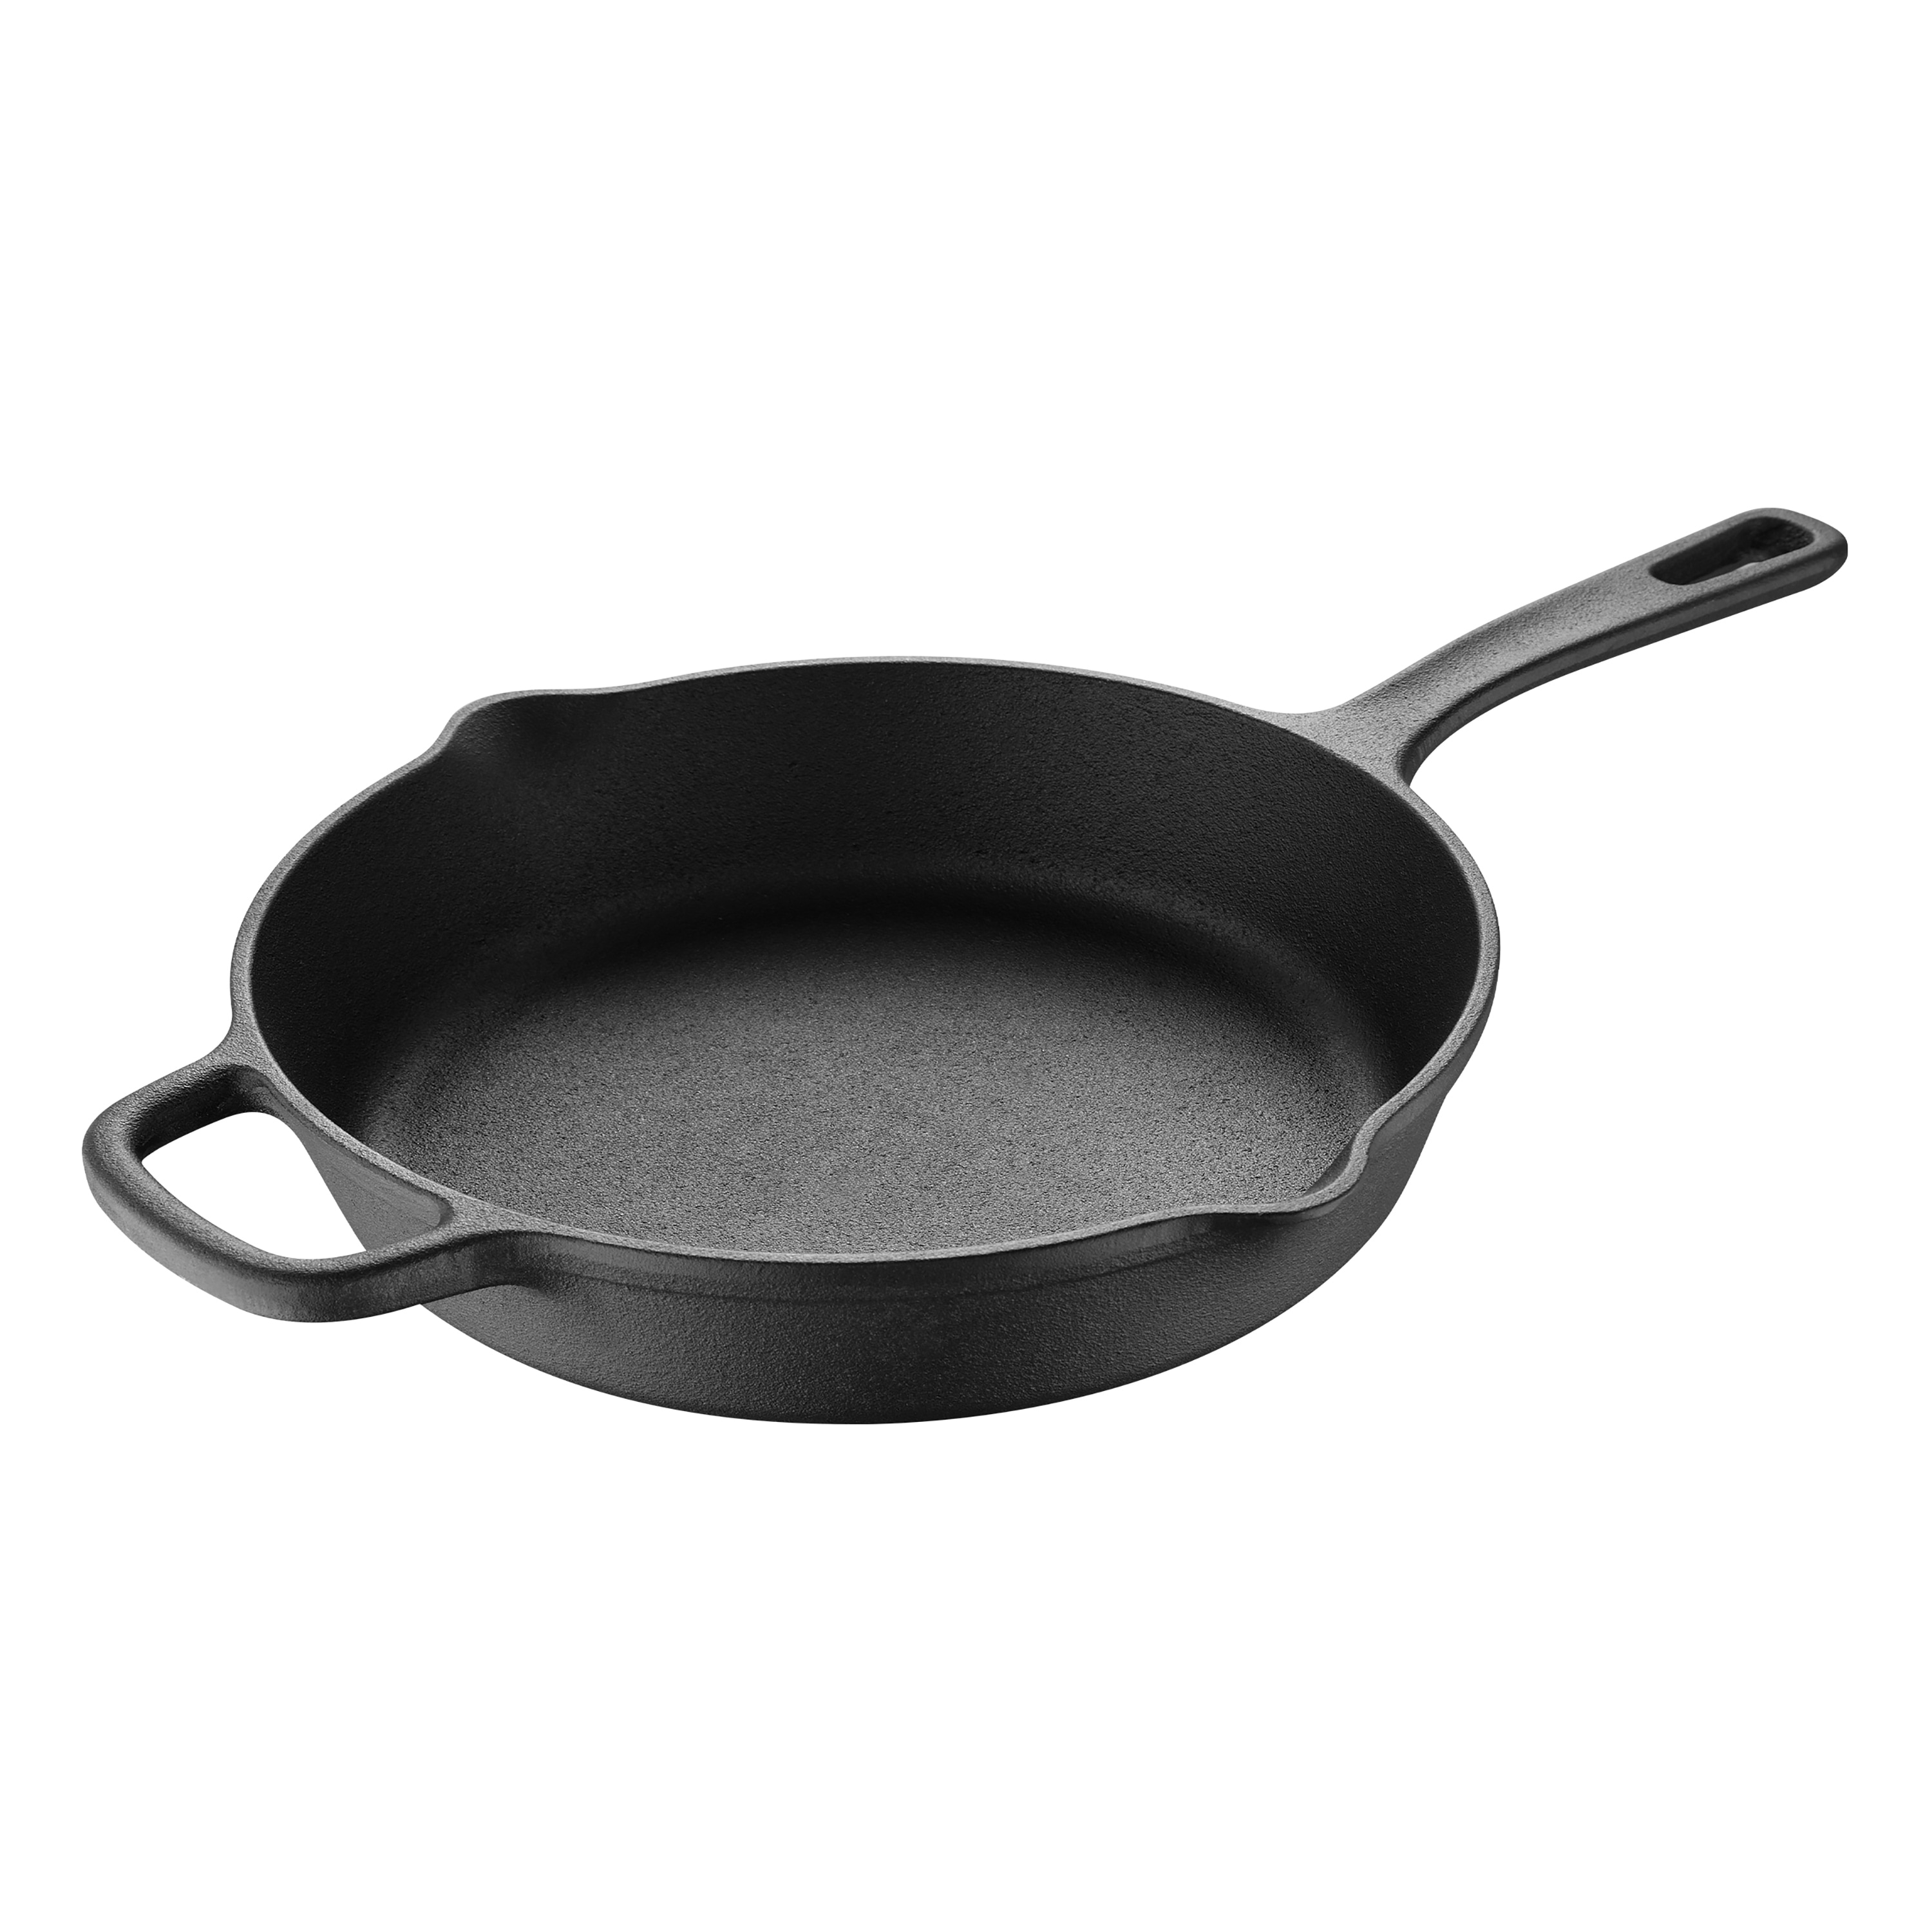 https://ak1.ostkcdn.com/images/products/is/images/direct/3e29aad0bd6bcf066a6ea81760a1a739b5ab36f4/Bergner-MPUS16302BLK-12-Inch-Fry-Pan-with-Helper-Handle.jpg